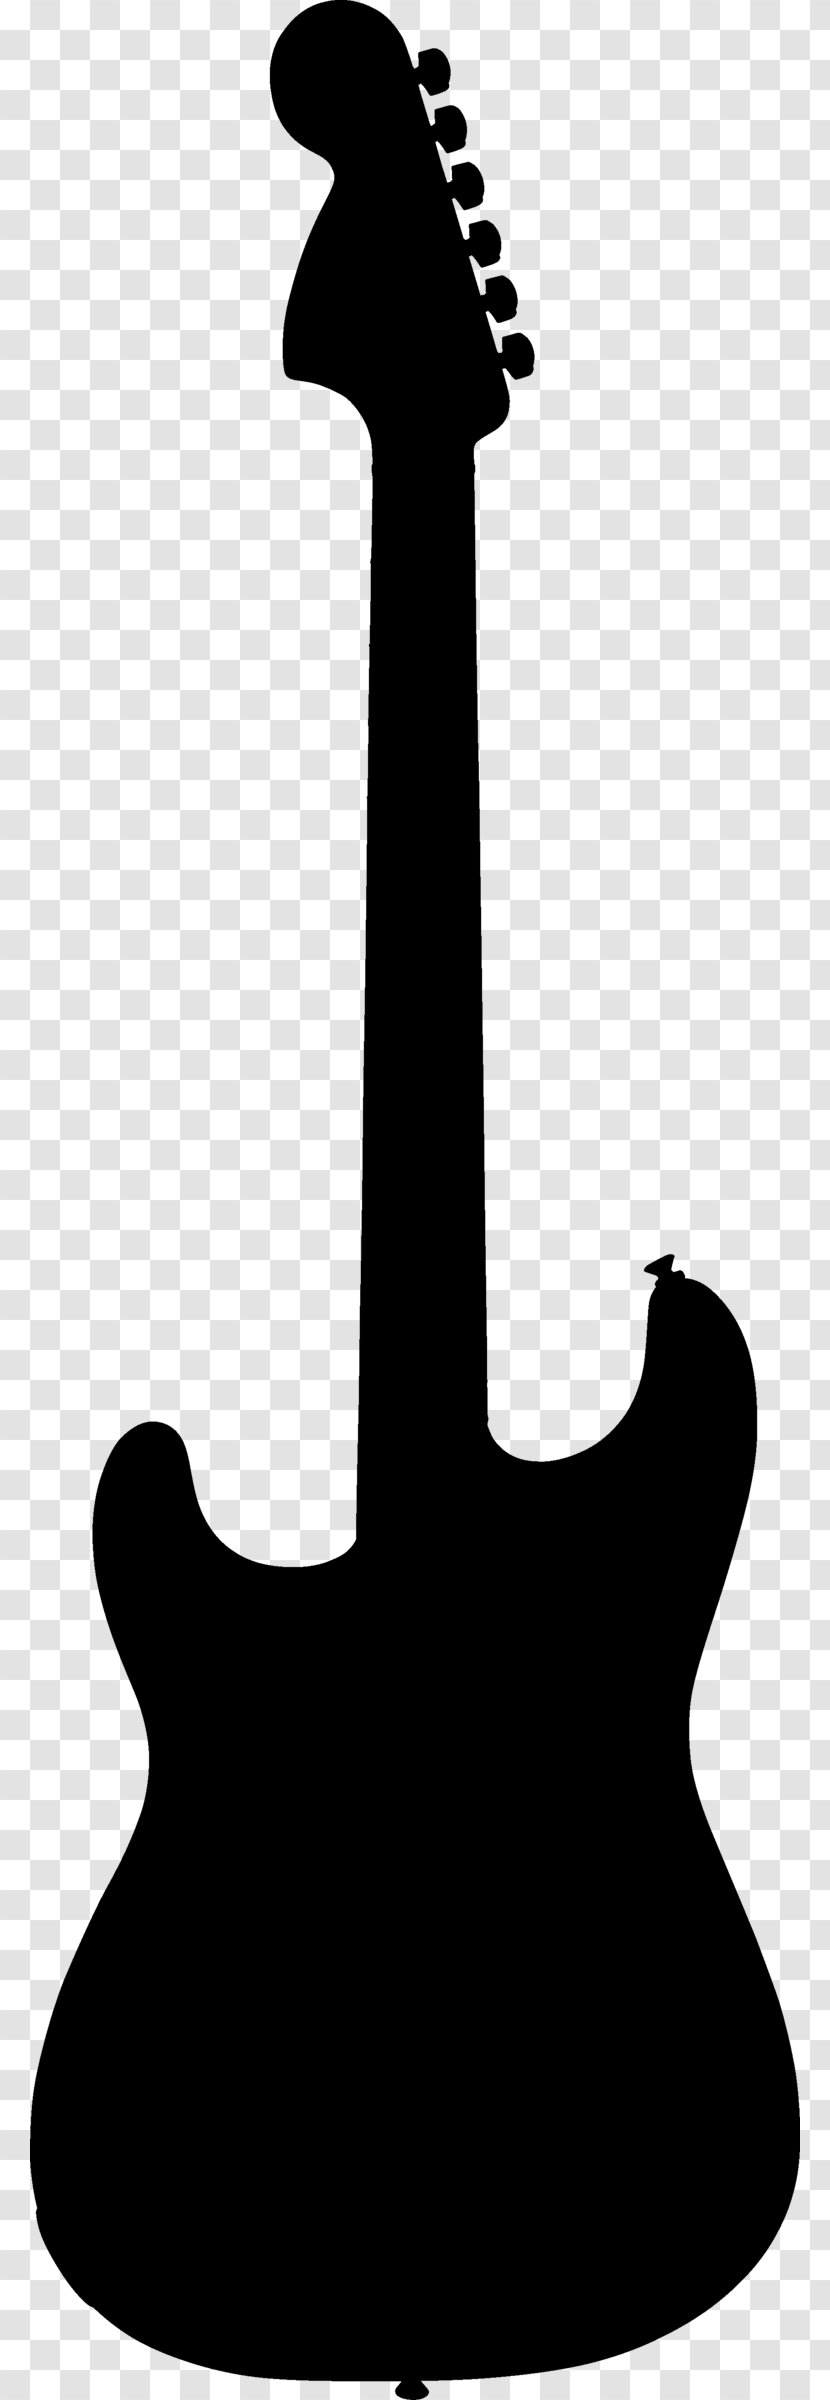 Electric Guitar Silhouette Bass Clip Art - String Instrument Accessory Transparent PNG